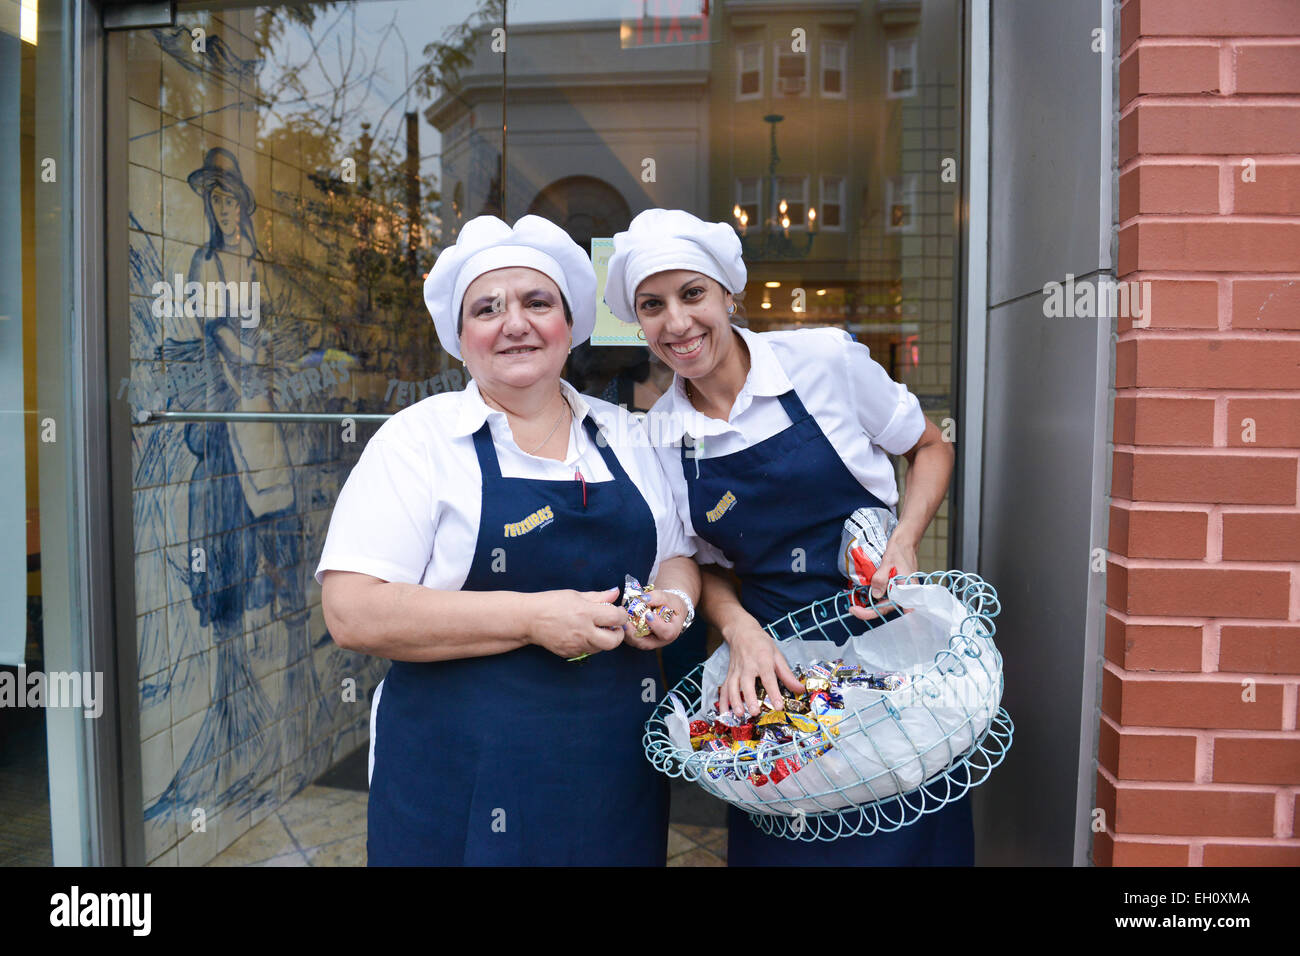 Two ladies from Teixeiras Bakery giving away candy at the front door of the business. Newark, New Jersey. USA. Stock Photo